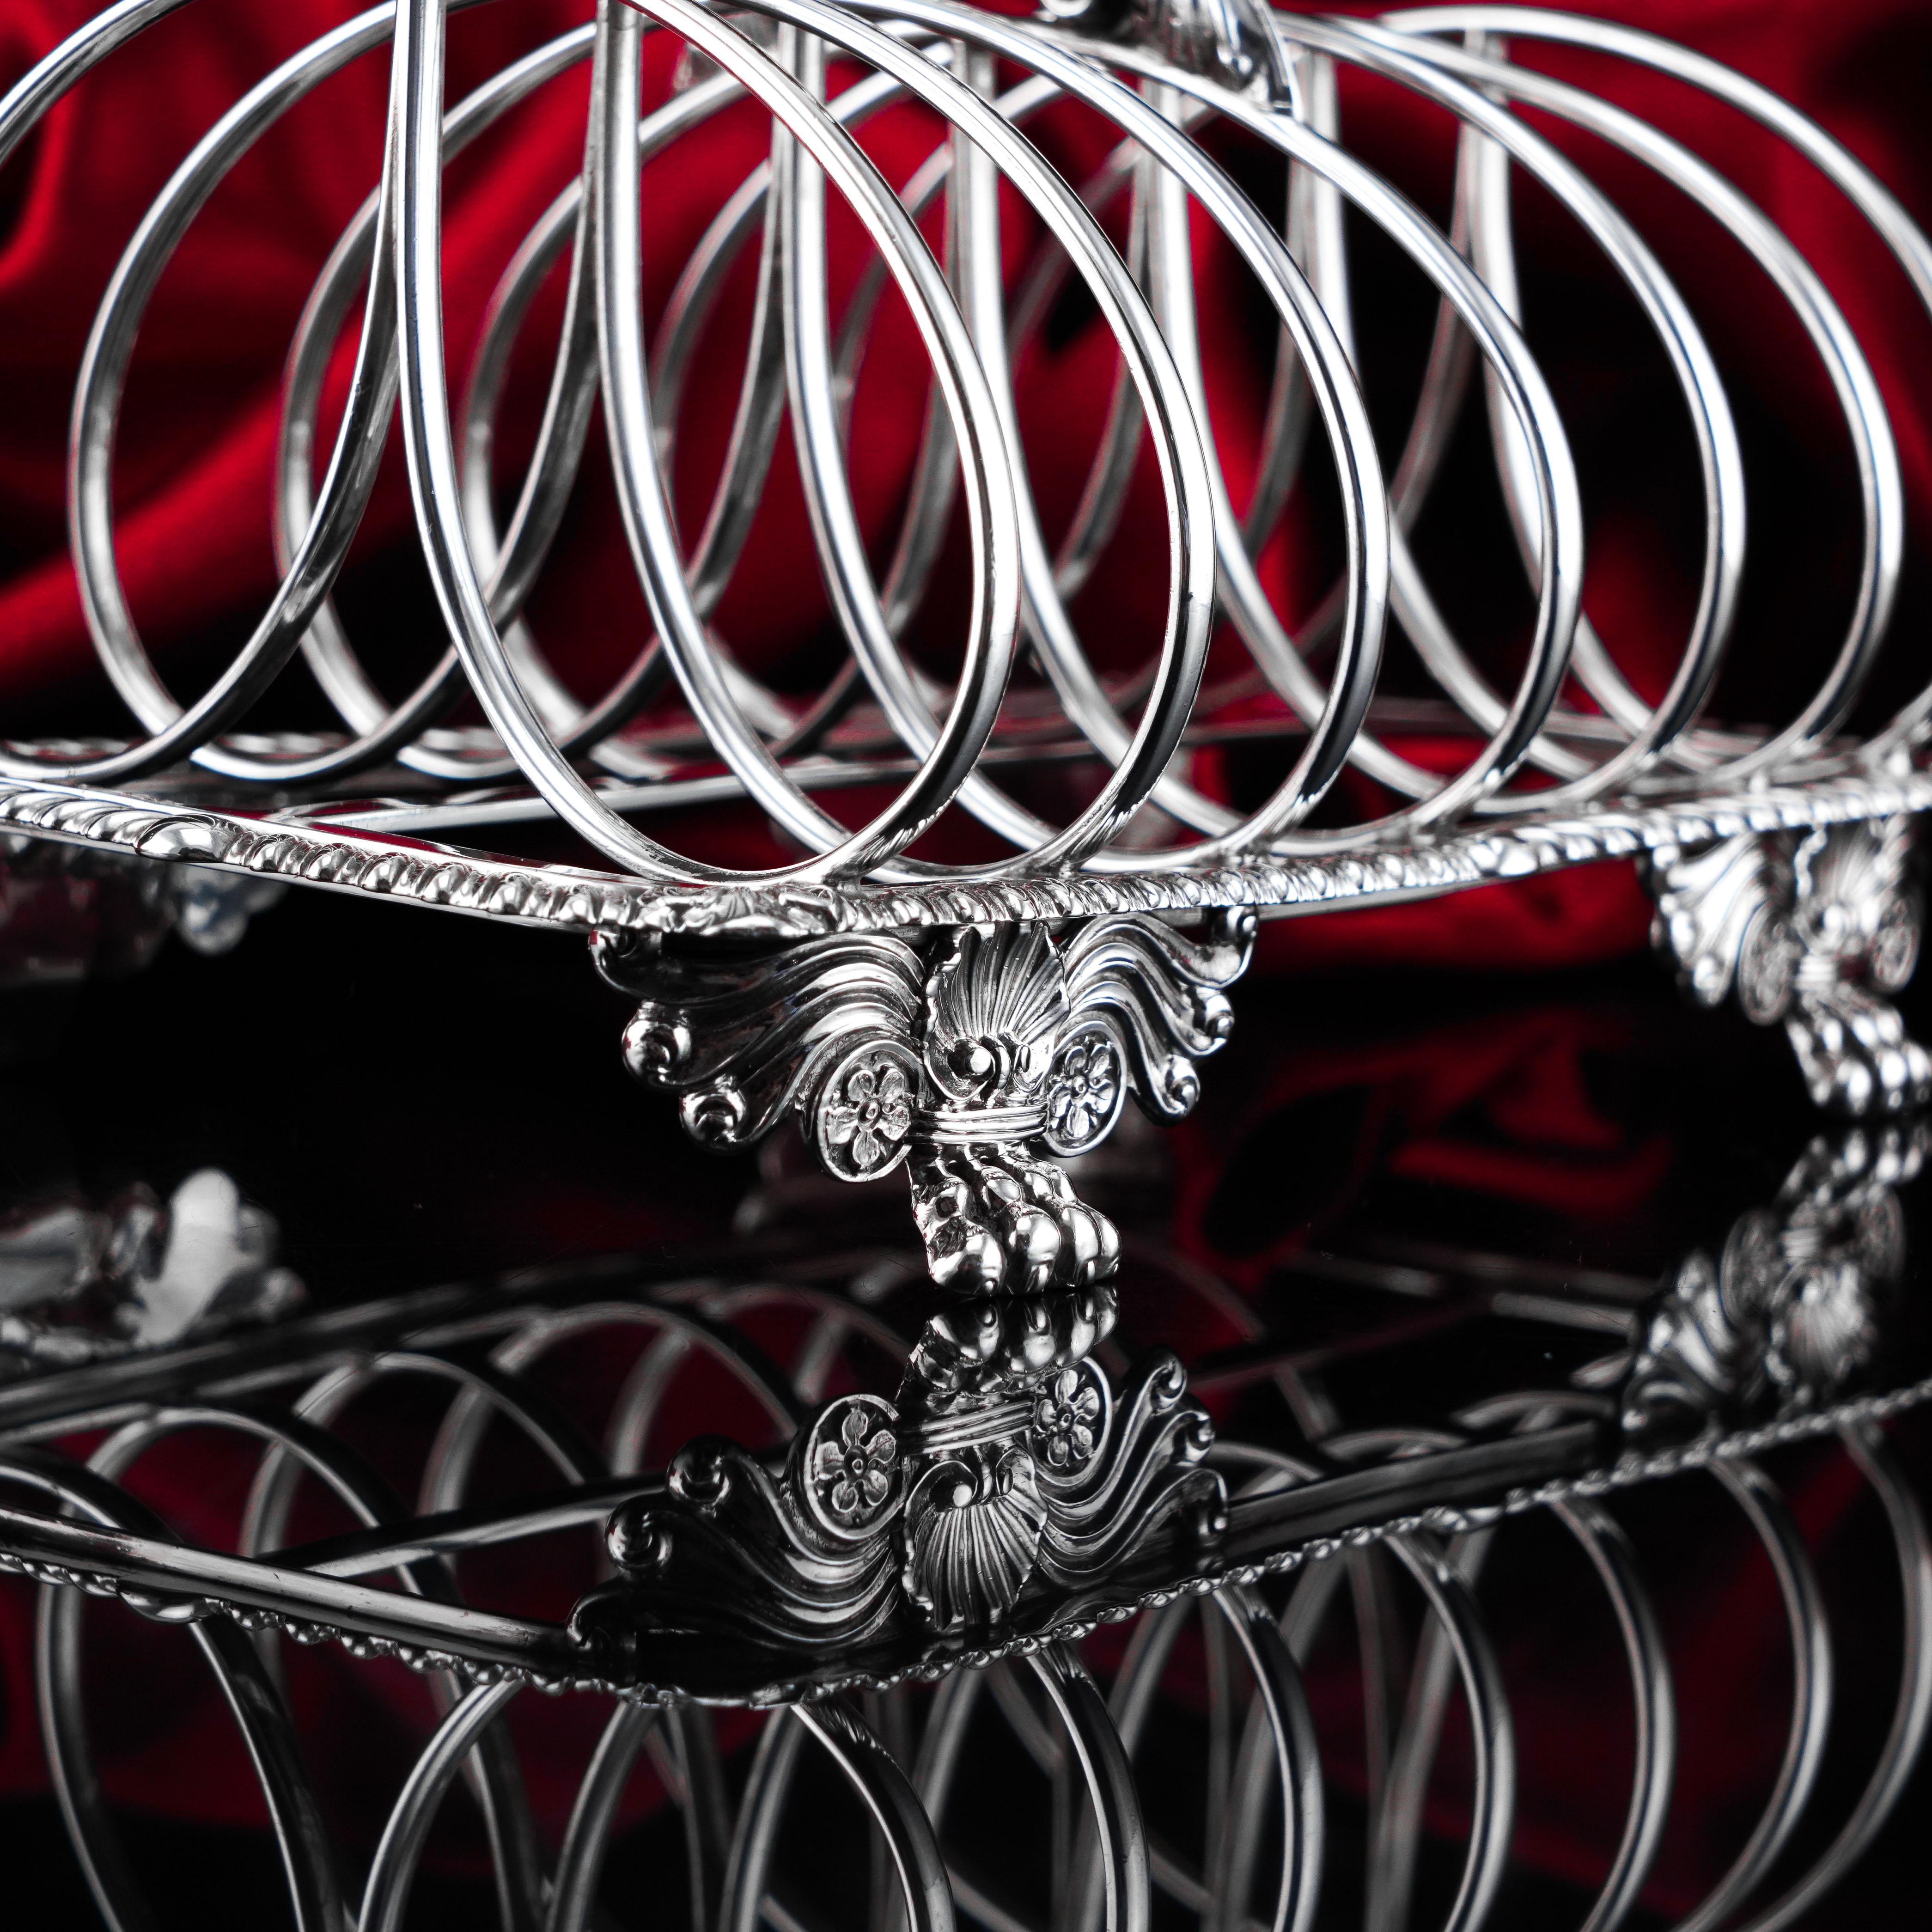 We are delighted to offer this majestic Georgian solid silver toast rack made in London 1827 with marks of William Elliott.
  
Featuring a distinguished elegant design and impressive even by itself as a highlighting piece on a breakfast table, this